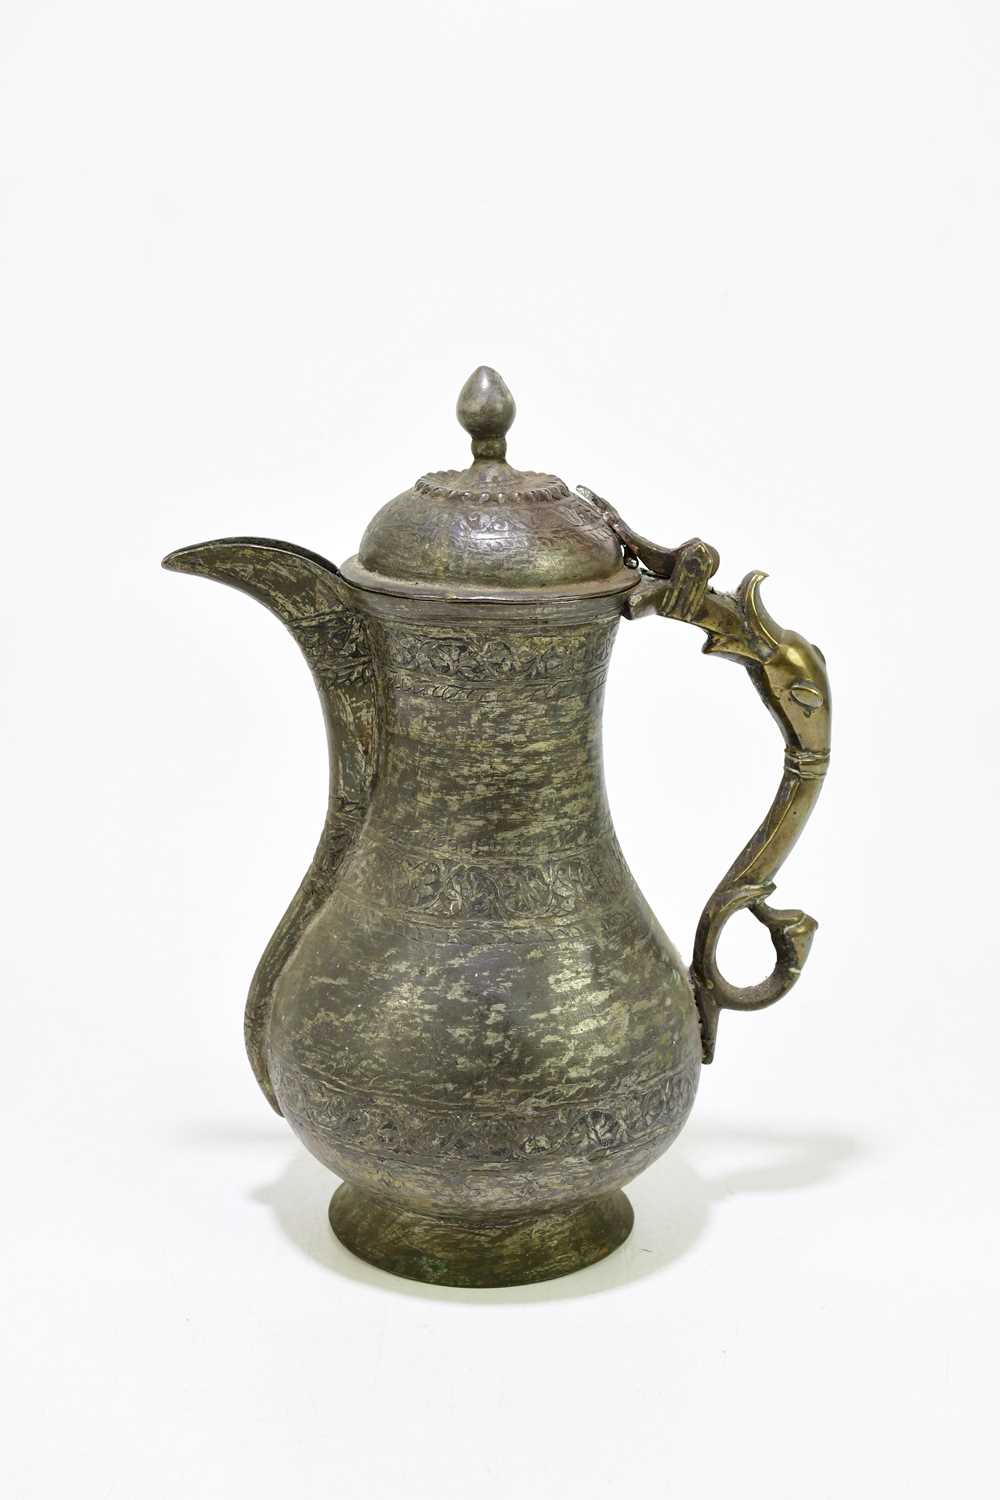 A 19th century Persian metal ewer, with foliate detailing and serpent handle, height 23cm. - Image 2 of 3